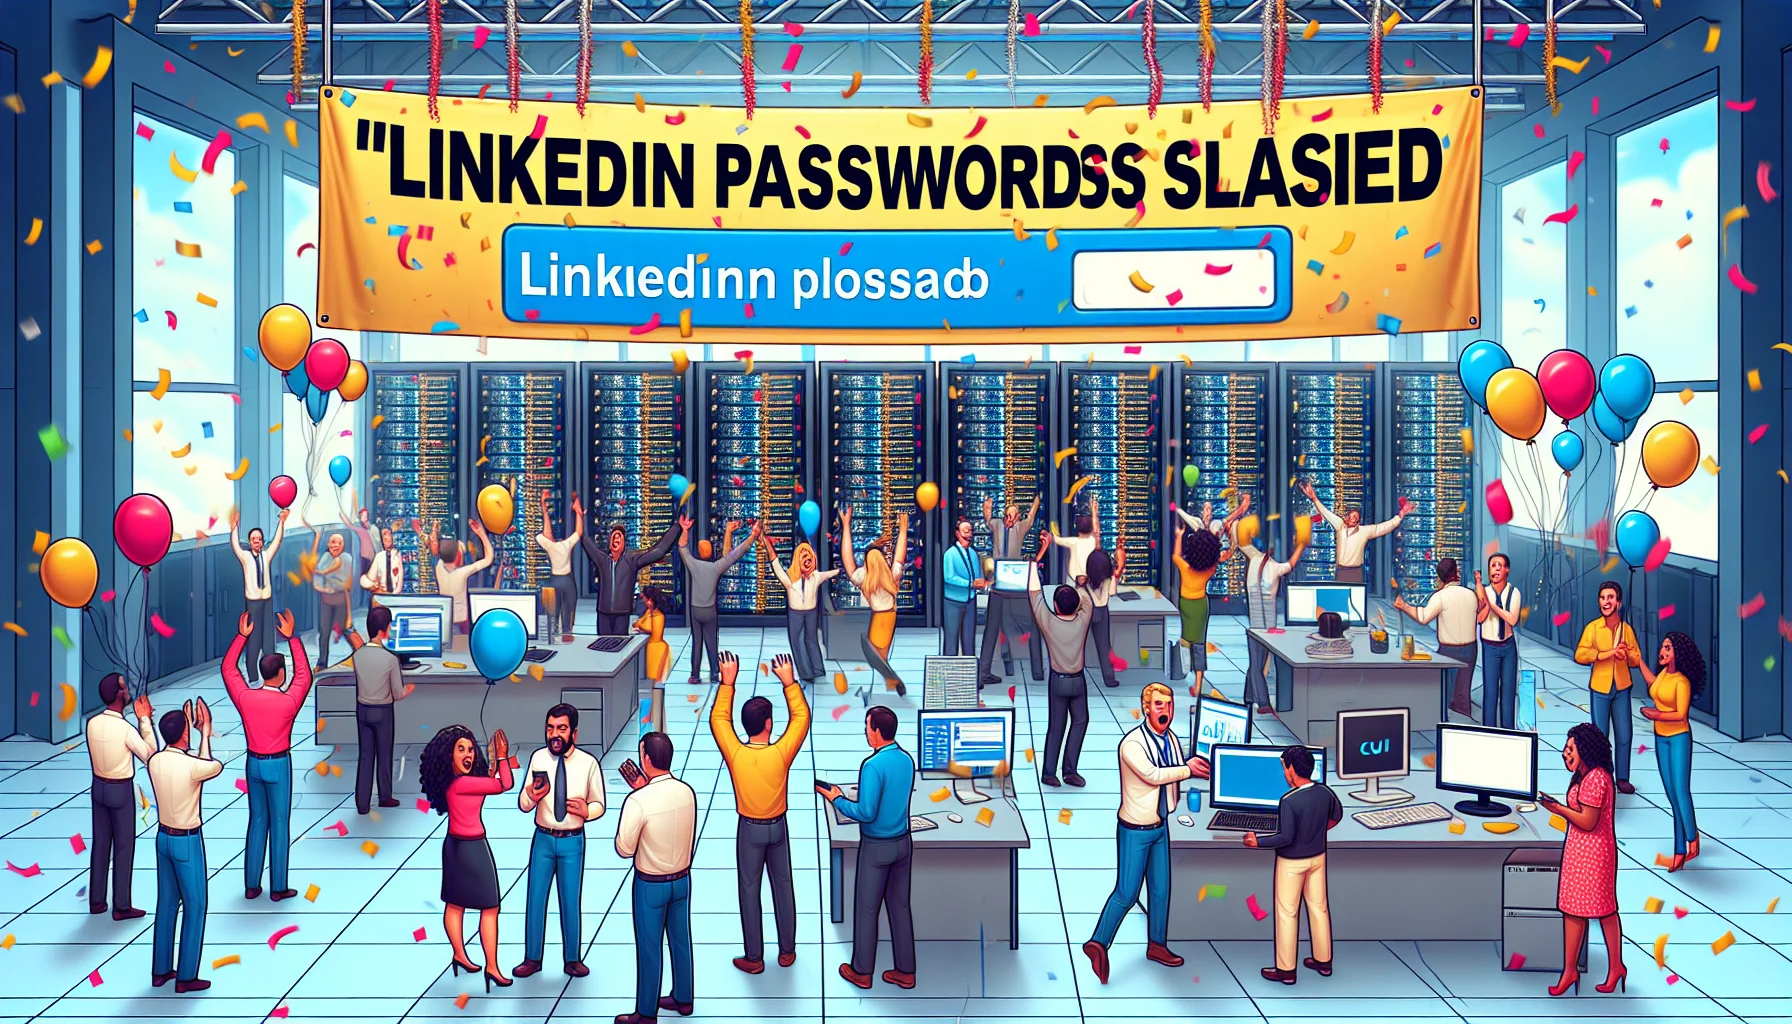 Create a humoristic image depicting a website hosting environment where 'LinkedIn Passwords Slashed' is the main headline, but instead of the usual worry, people are celebrating with confetti and balloons. The setting should be in a modern cloud workspace with dozens of server racks in the background. Everyone in the scene is joyous, there is a festive atmosphere with a banner stating the funny headline. The room should be populated by diverse tech professionals including engineers and IT specialists of various descents such as Asian, Caucasian and Middle-Eastern, and of different genders.